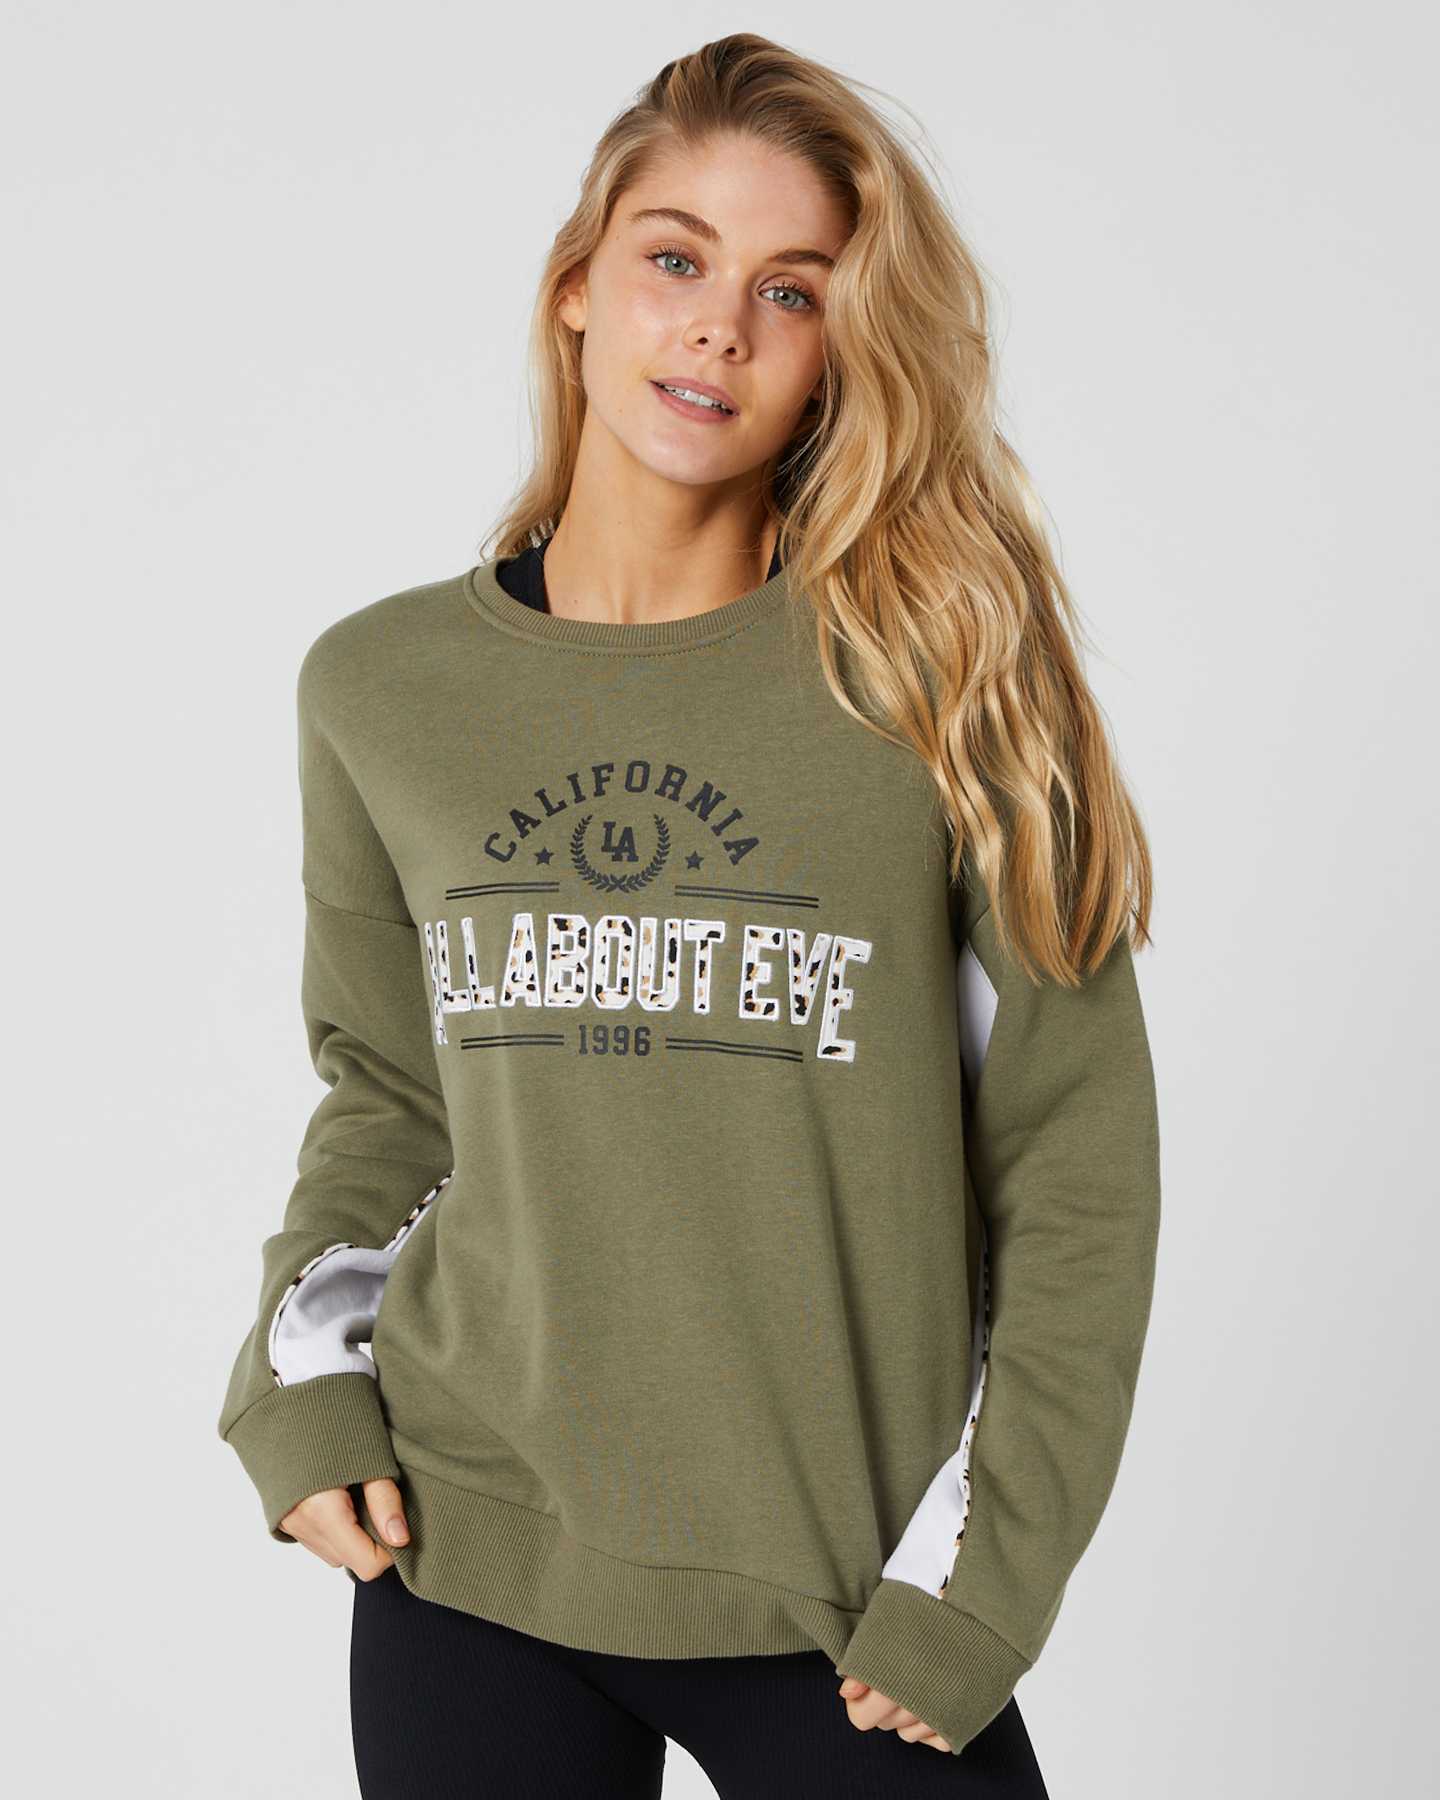 All About Eve Anderson Sports Crew - Khaki | SurfStitch